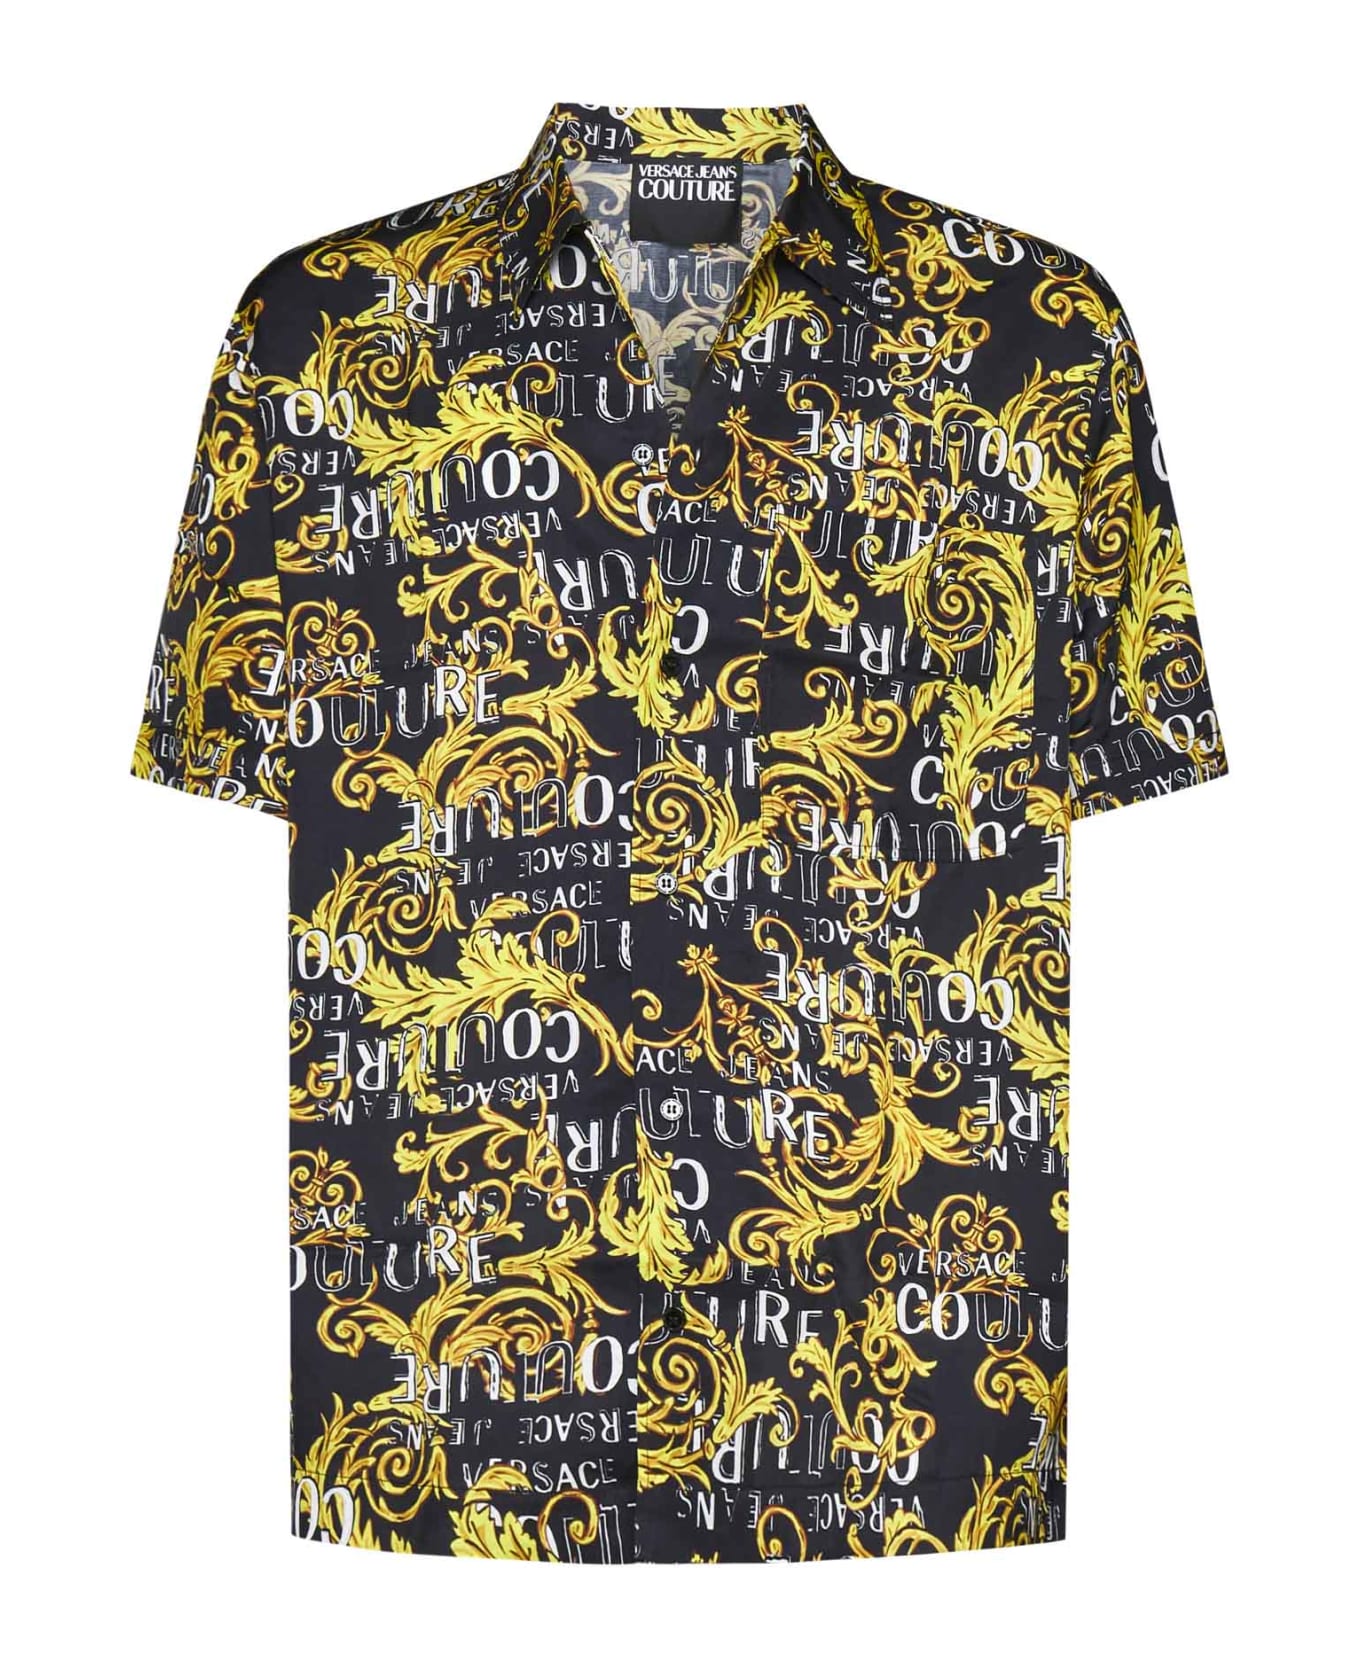 Versace Jeans Couture Shirt - Black gold